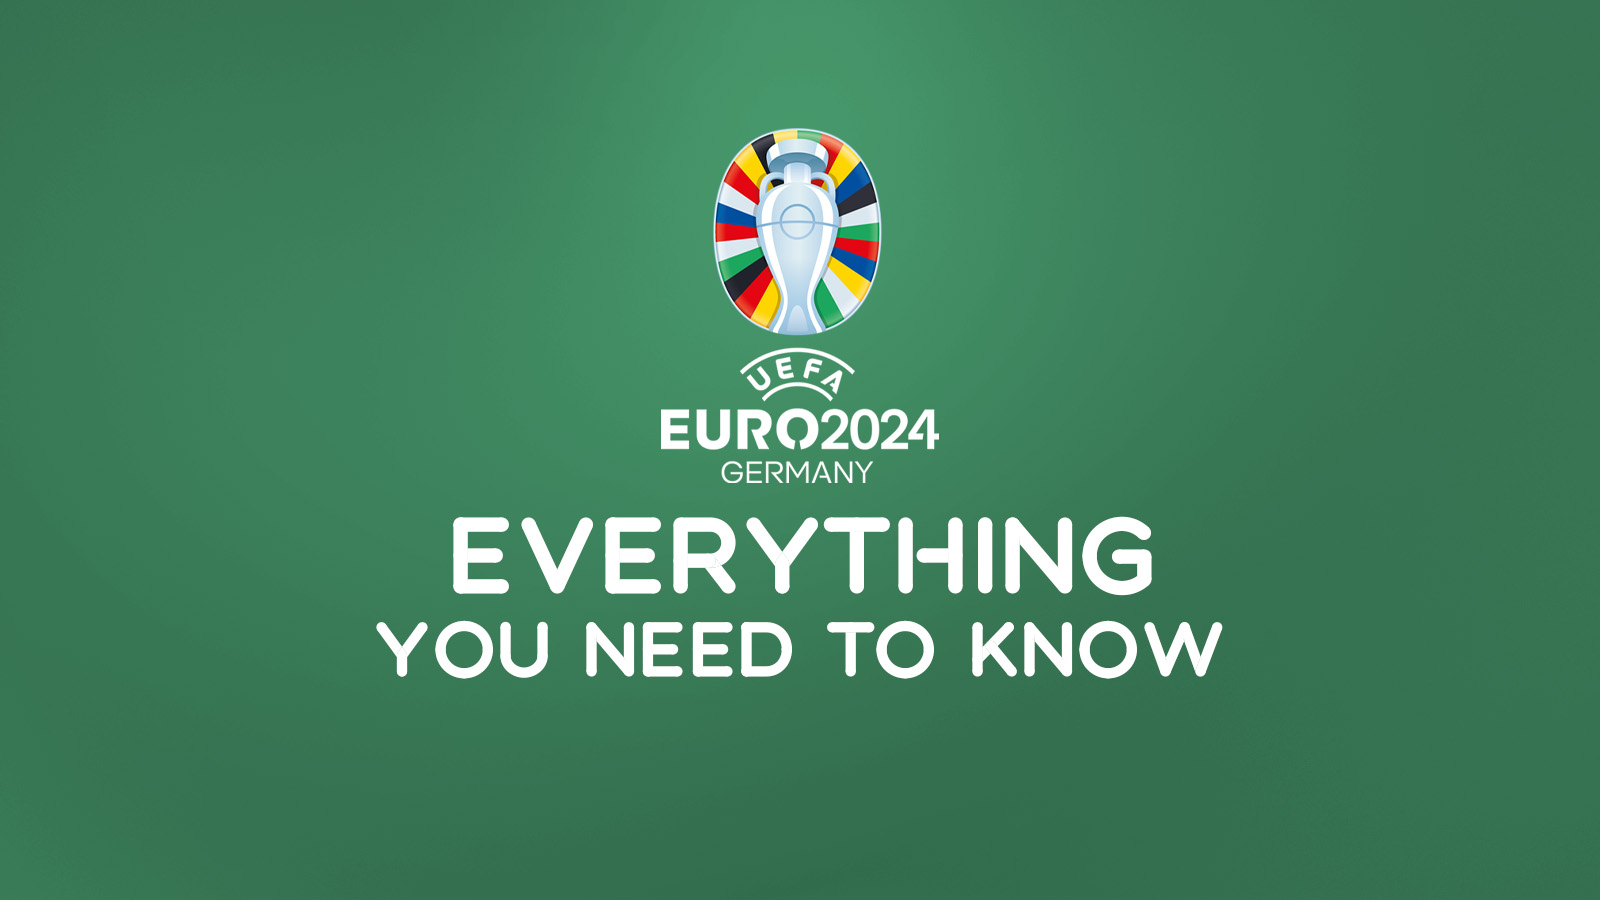 All you need to know about EURO 2024